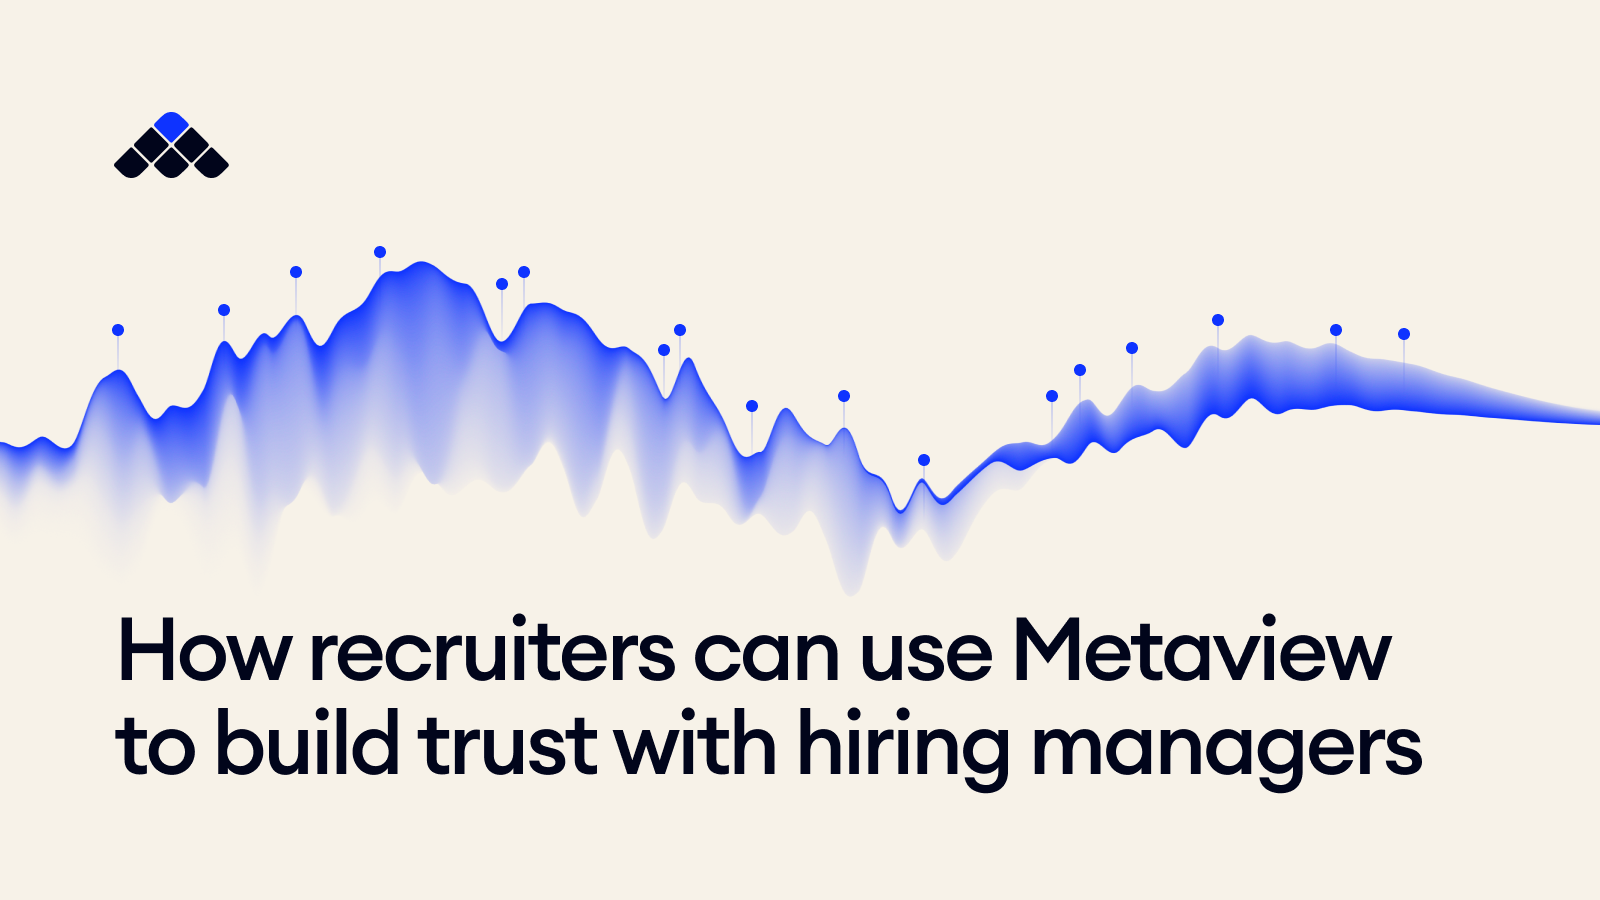 How recruiters can use Metaview to build trust with hiring managers